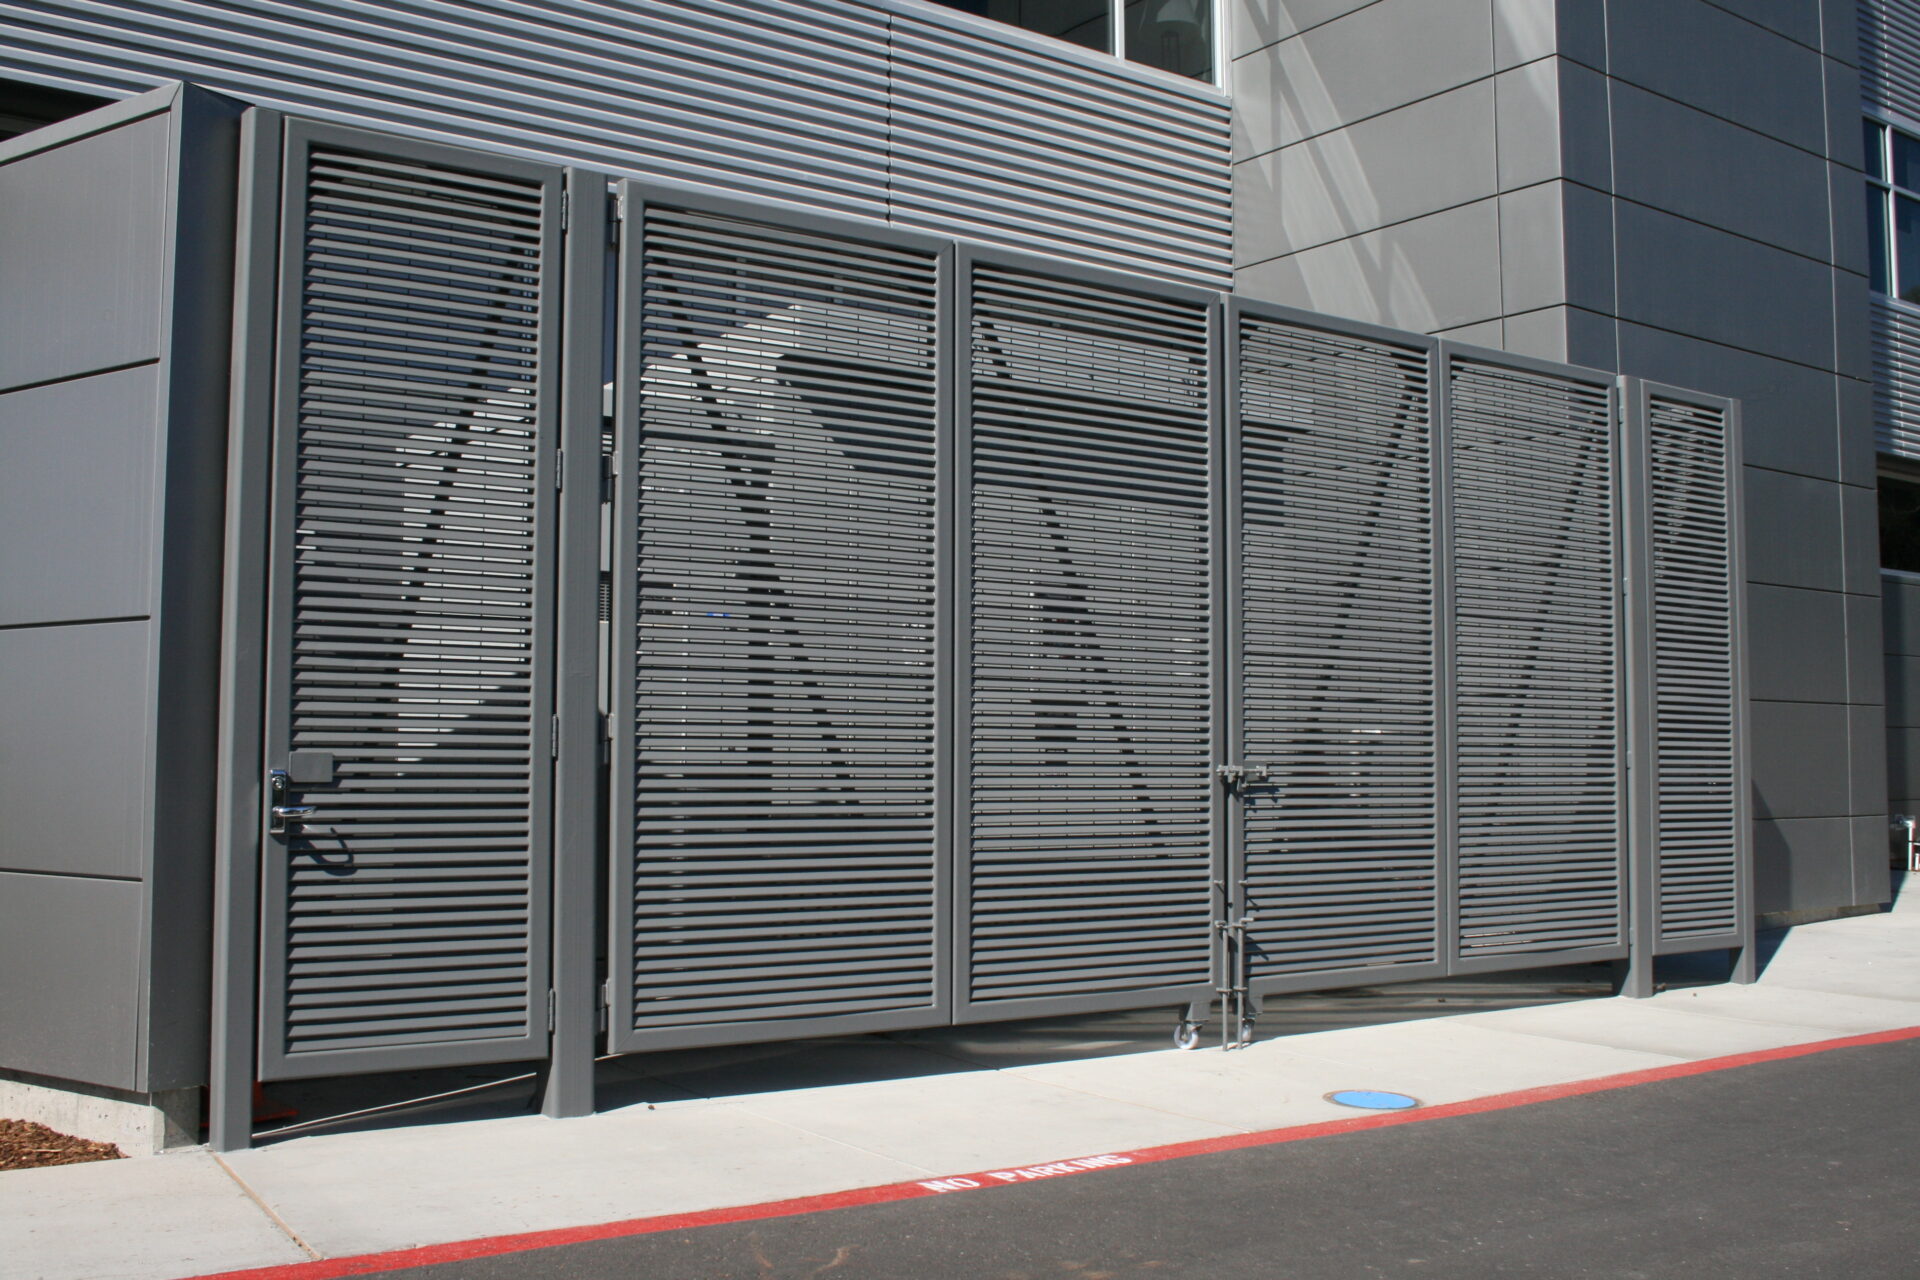 Opus80 louver grates provide screening enclosure with pedestrian grate